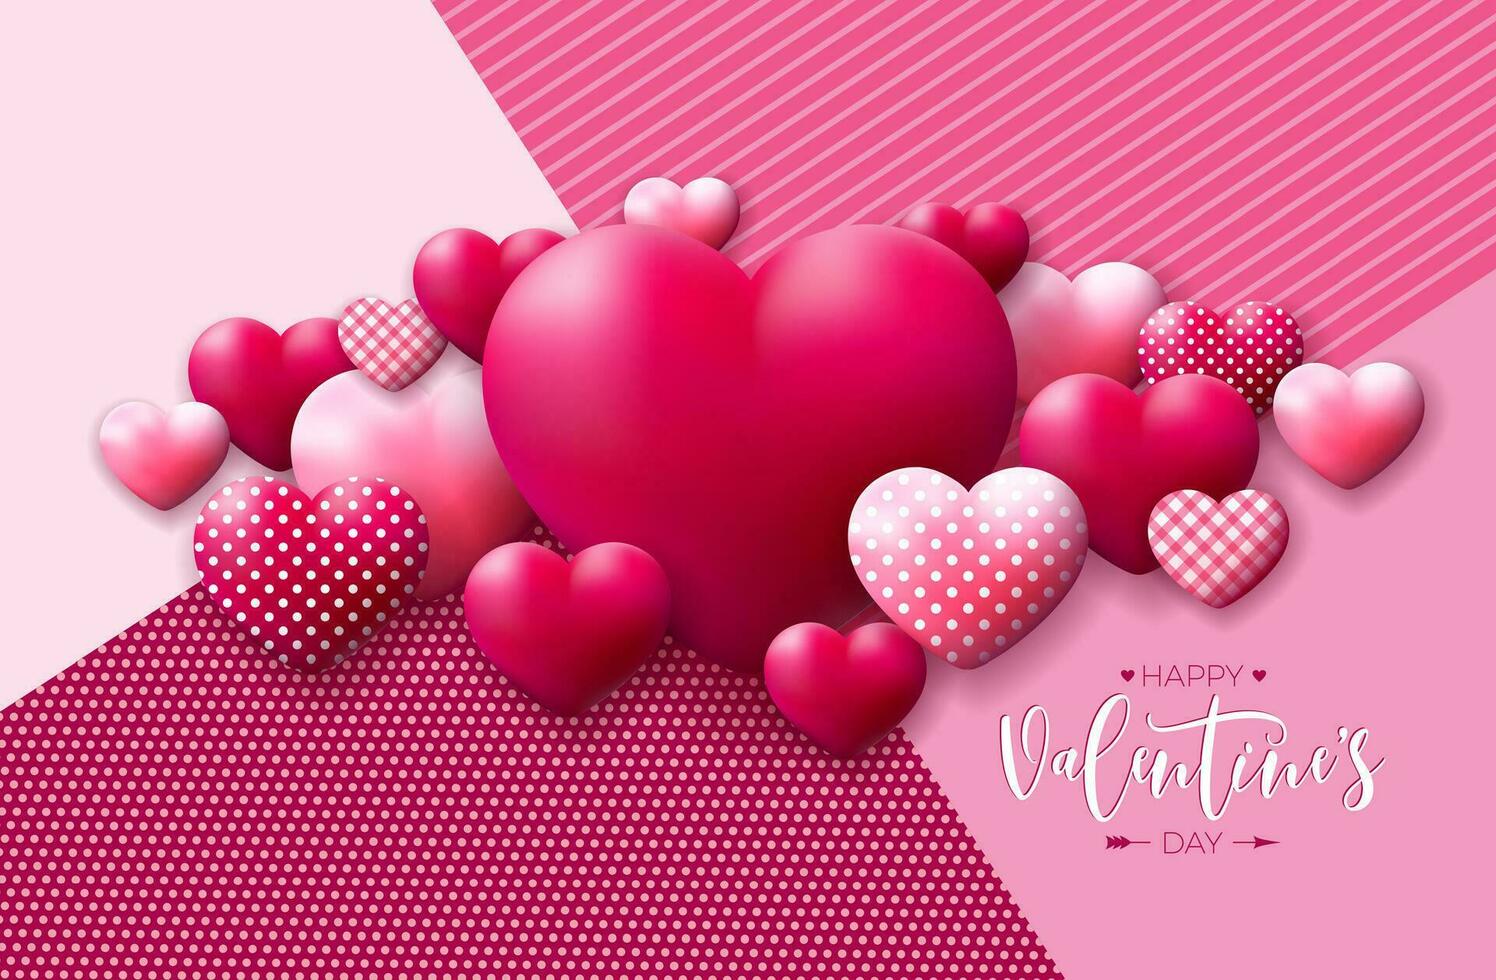 Happy Valentines Day Design with Red and White Pattern Heart and Typography Letter on Abstract Pink Background. Vector Wedding and Romantic Love Valentine Theme Illustration for Flyer, Greeting Card